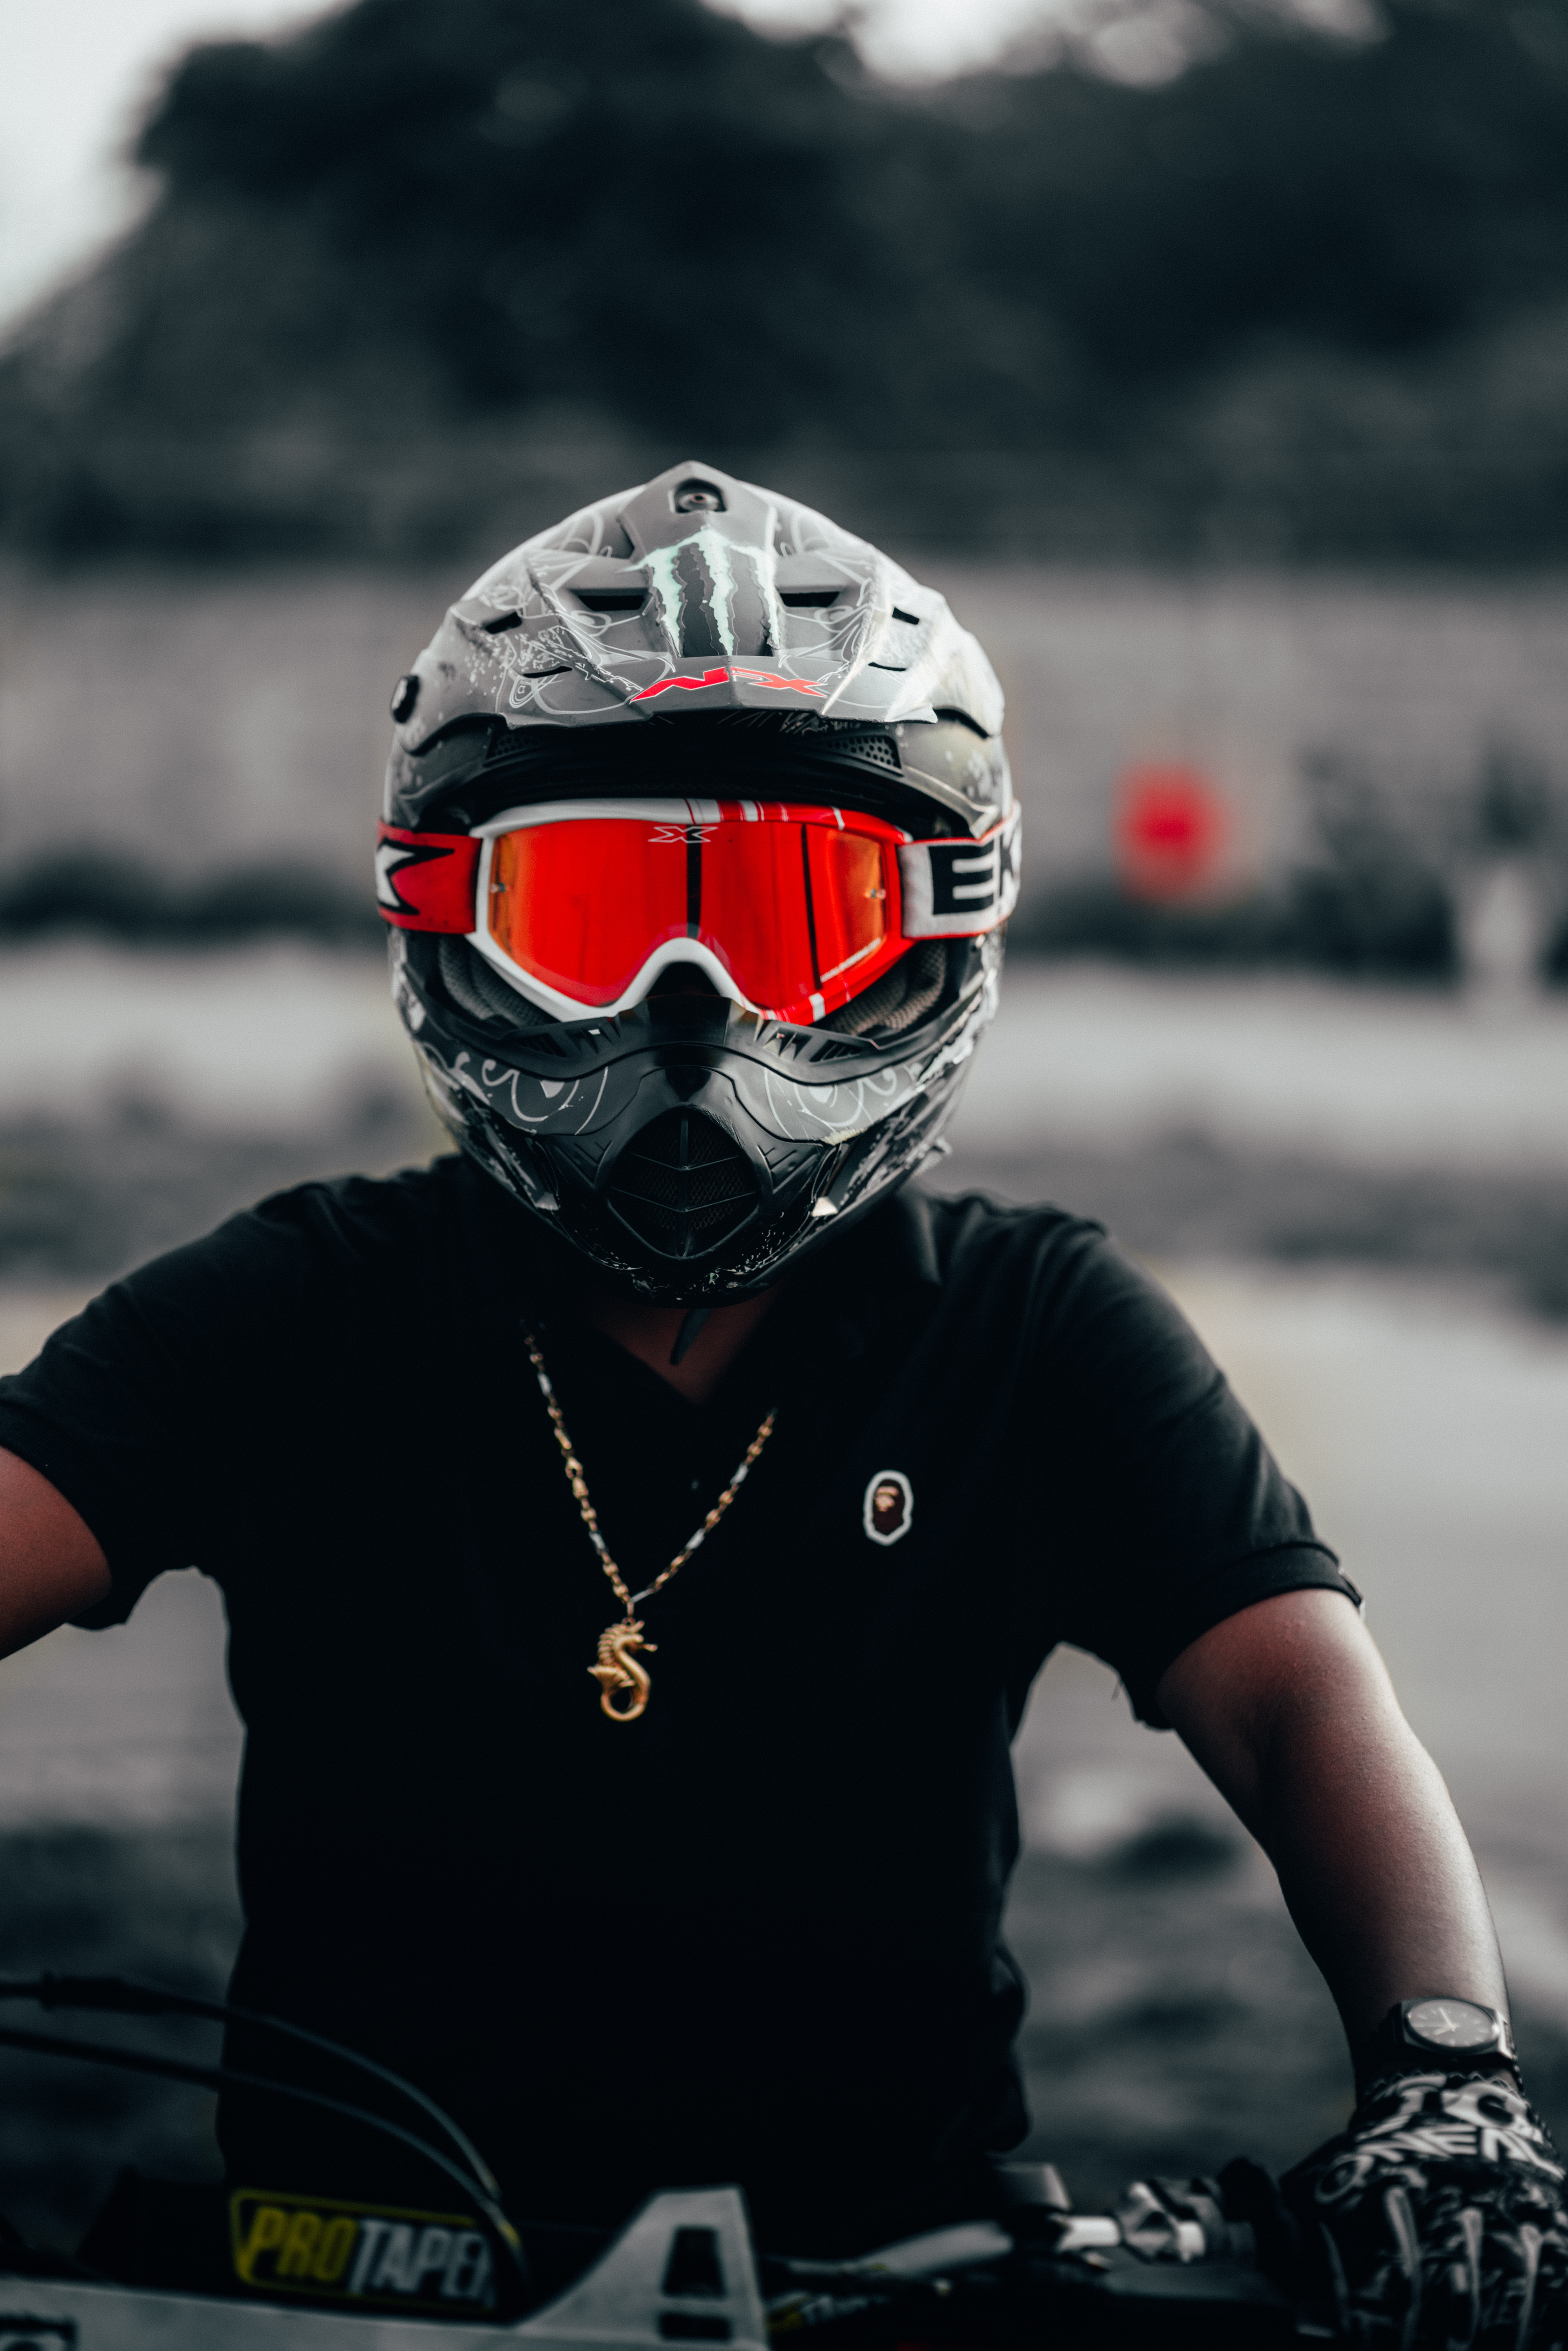 motorcyclist, red, miscellanea, miscellaneous, helmet, glasses, spectacles cellphone